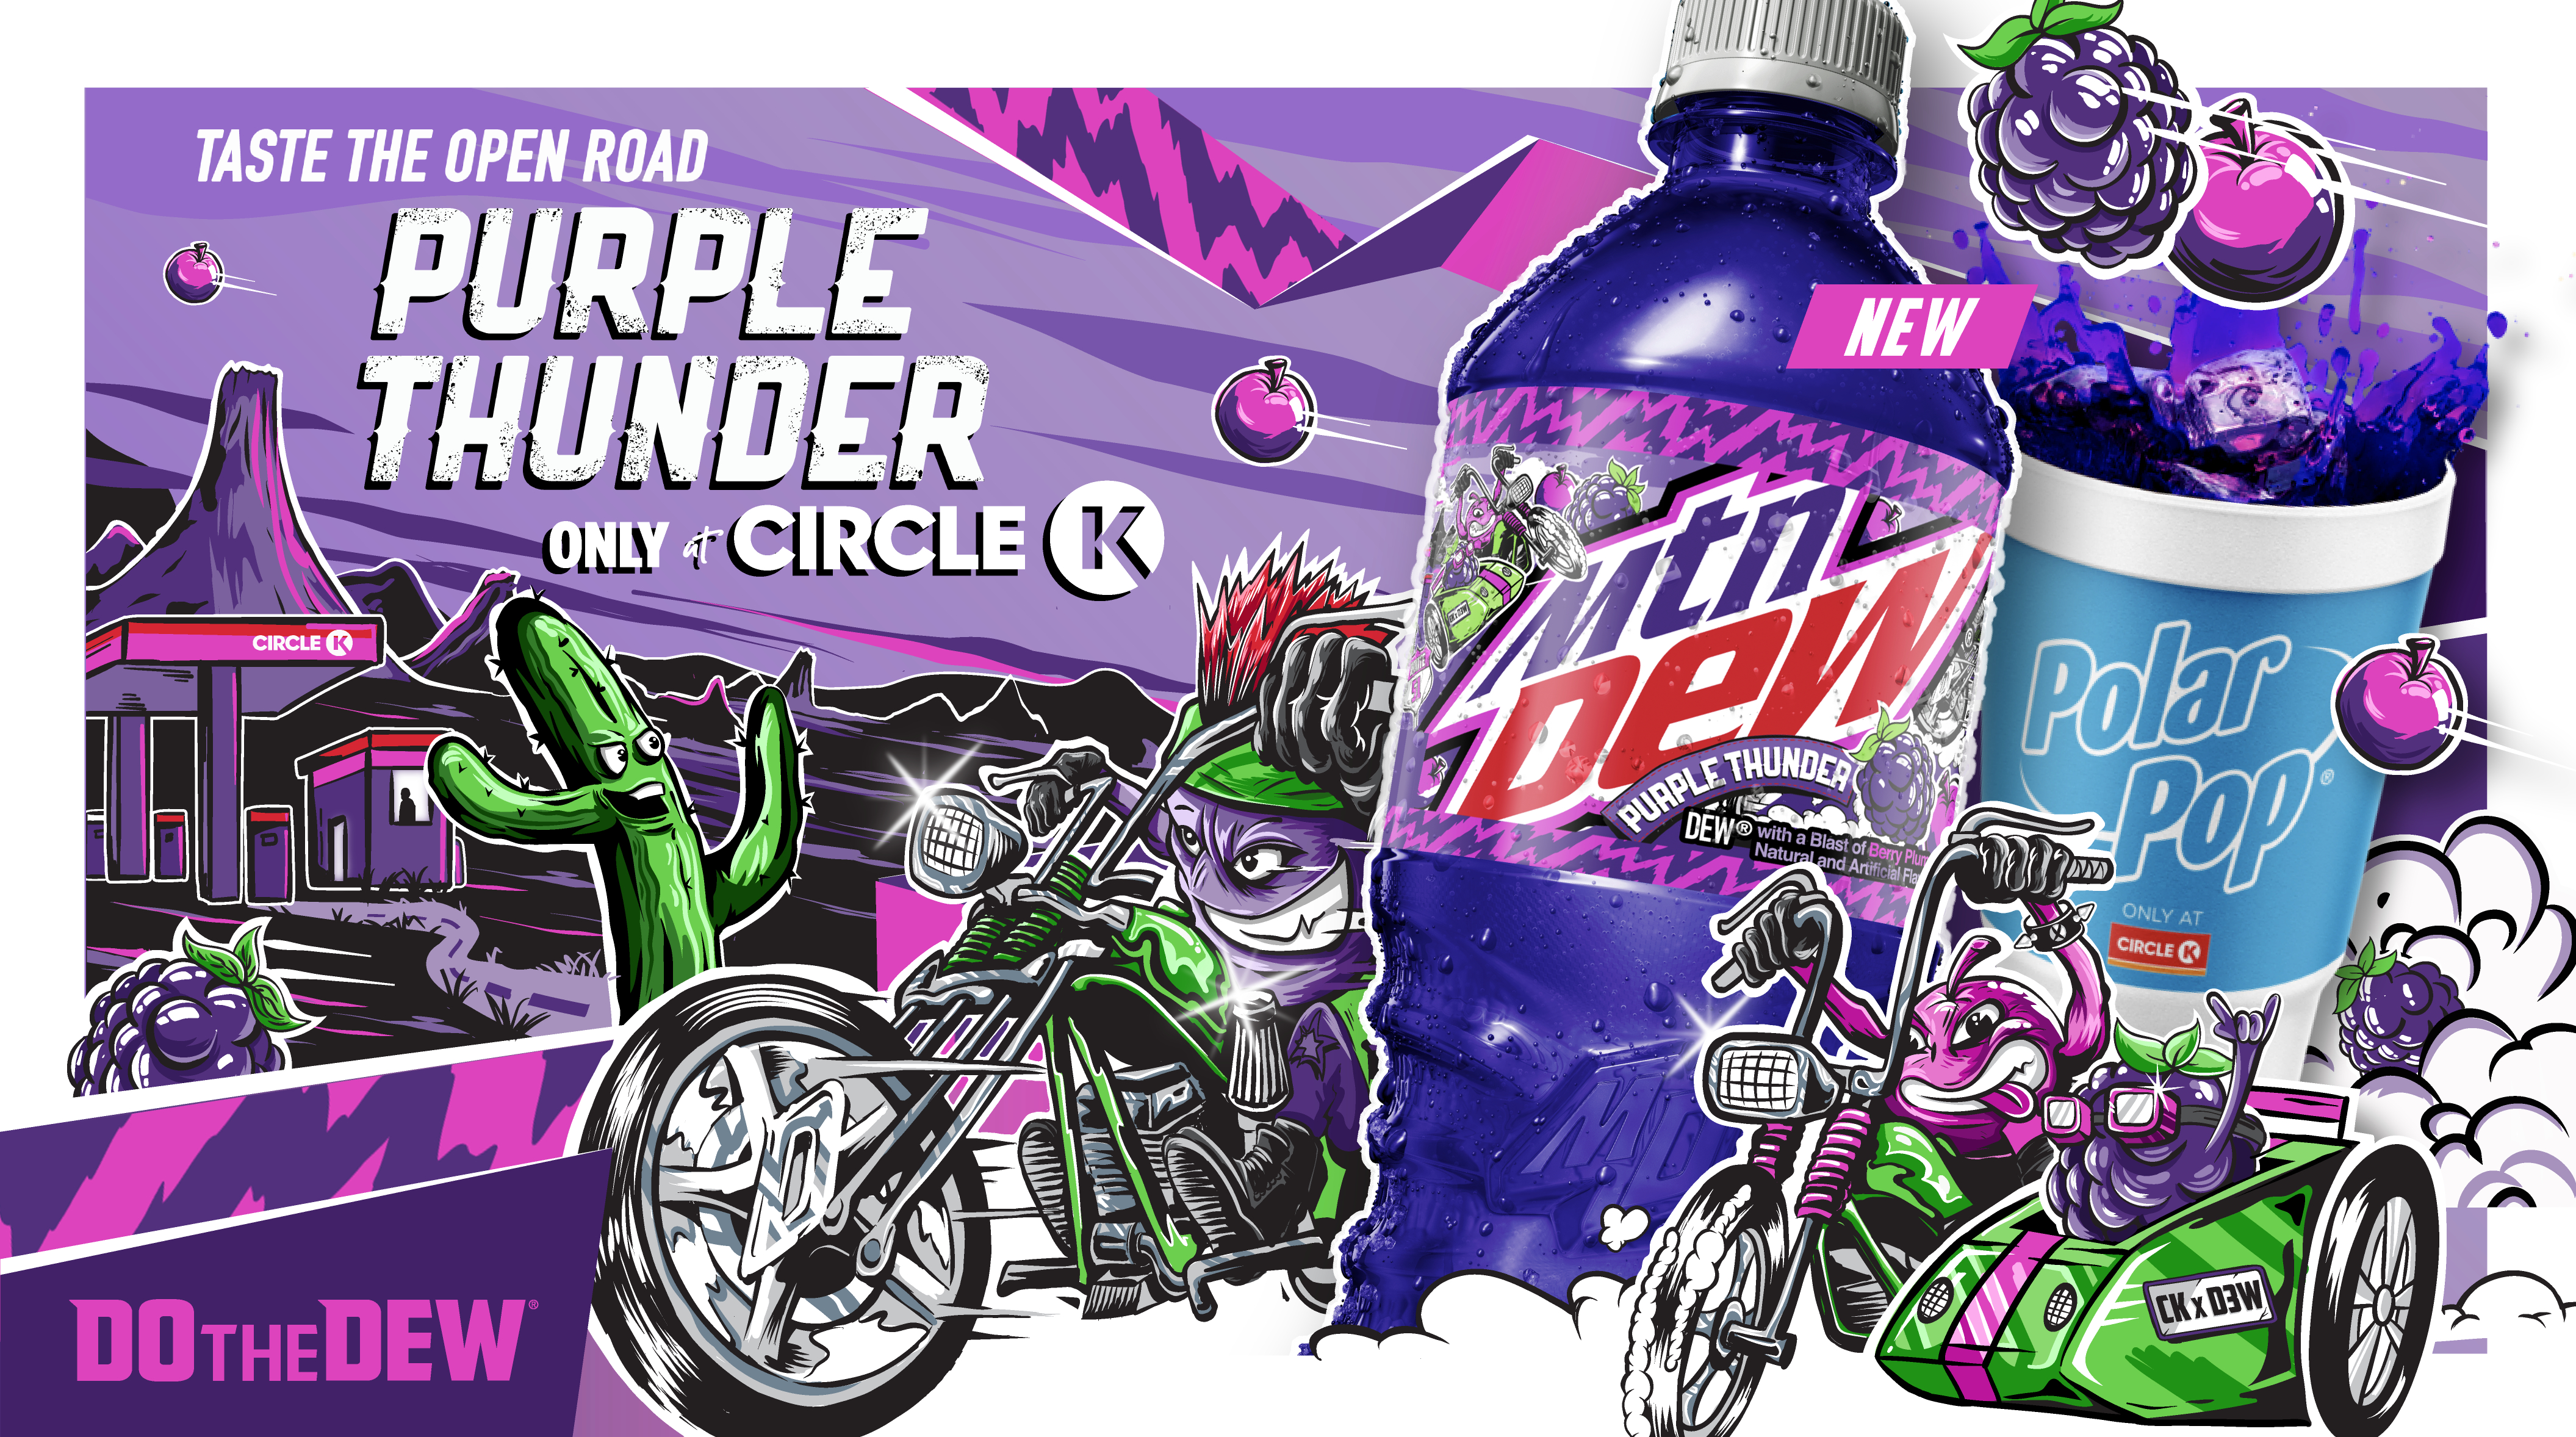 Circle K And Mtn Dew Invite Dew Nation To Taste The Open Road With Its Latest Drink Innovation Mtn Dew Purple Thunder Business Wire